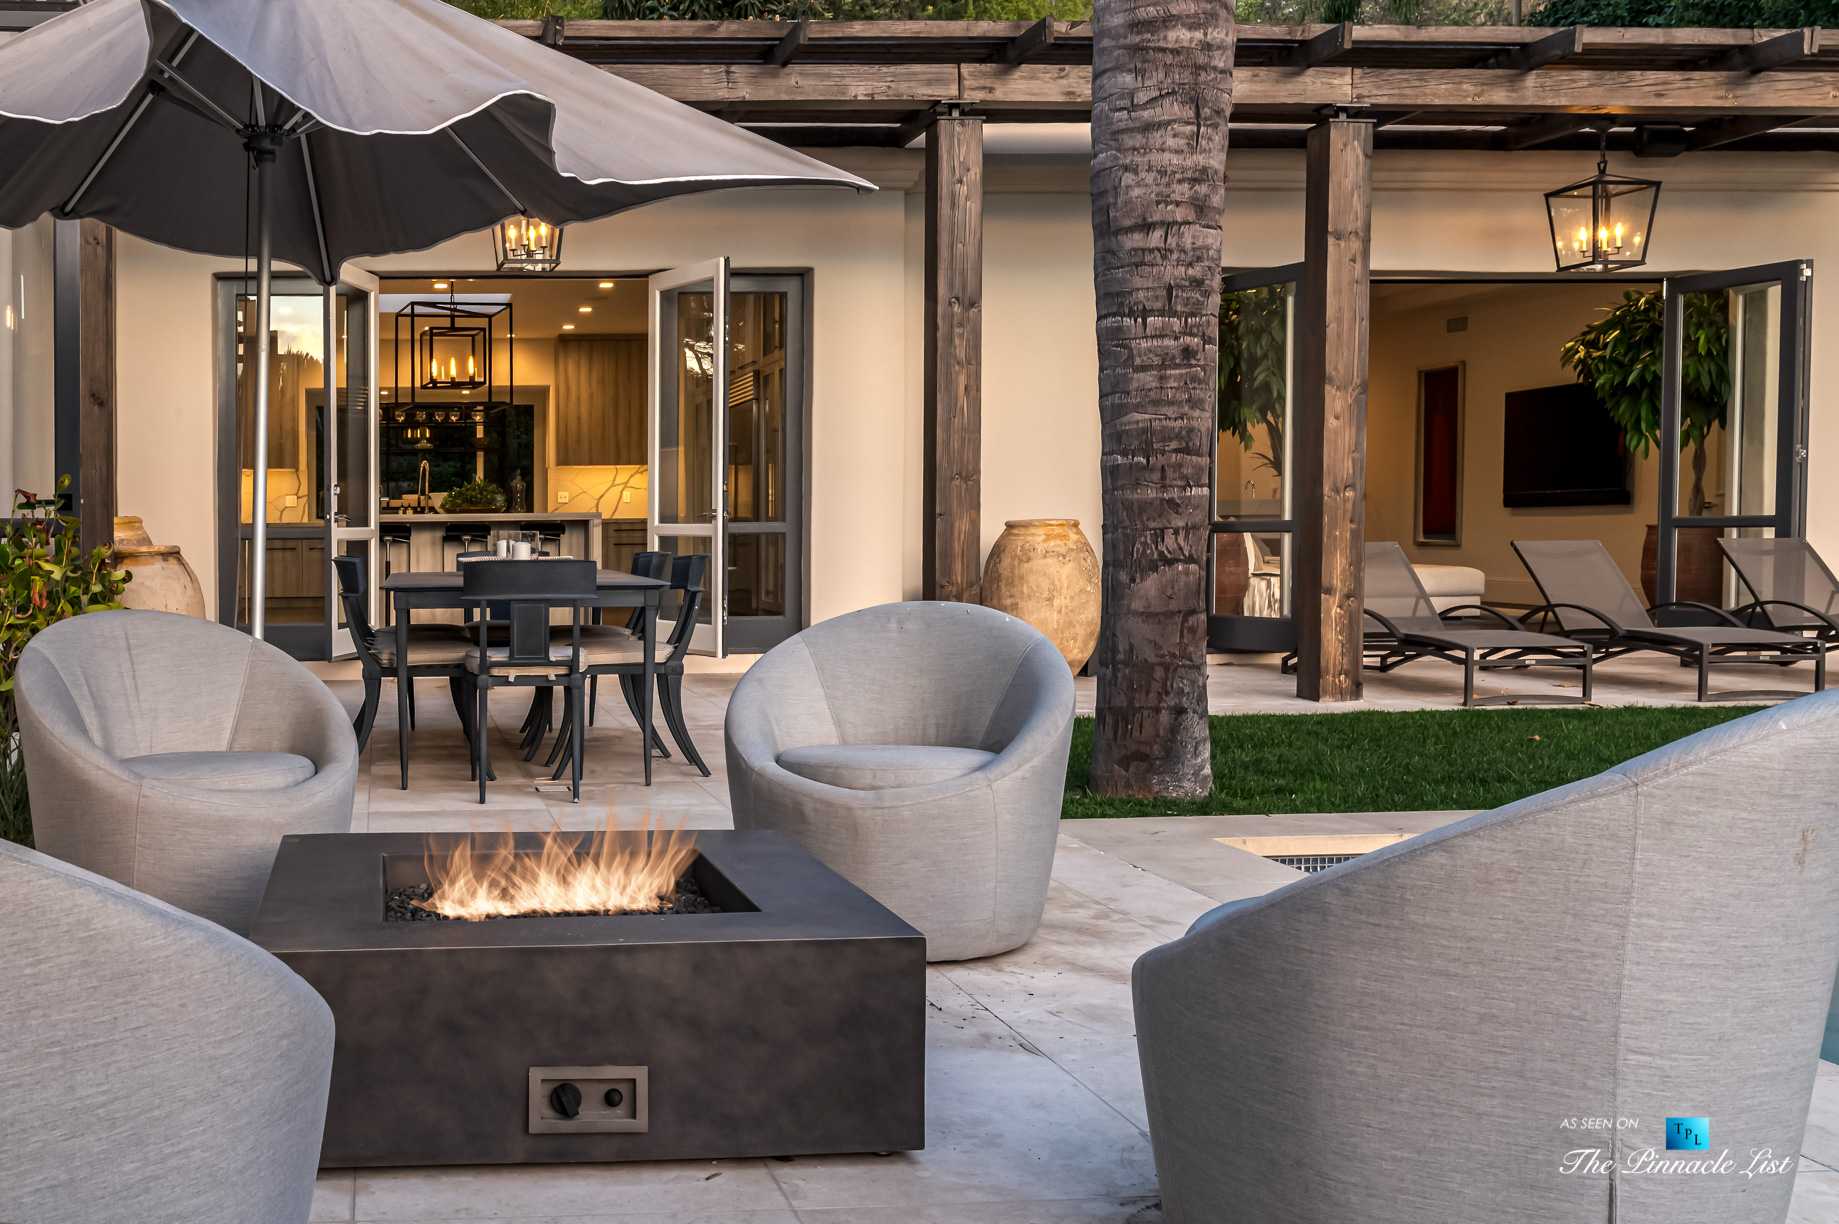 2720 Ellison Dr, Beverly Hills, CA, USA - Deck Fire Pit Next to Pool - Luxury Real Estate - Italian Villa Hilltop Home